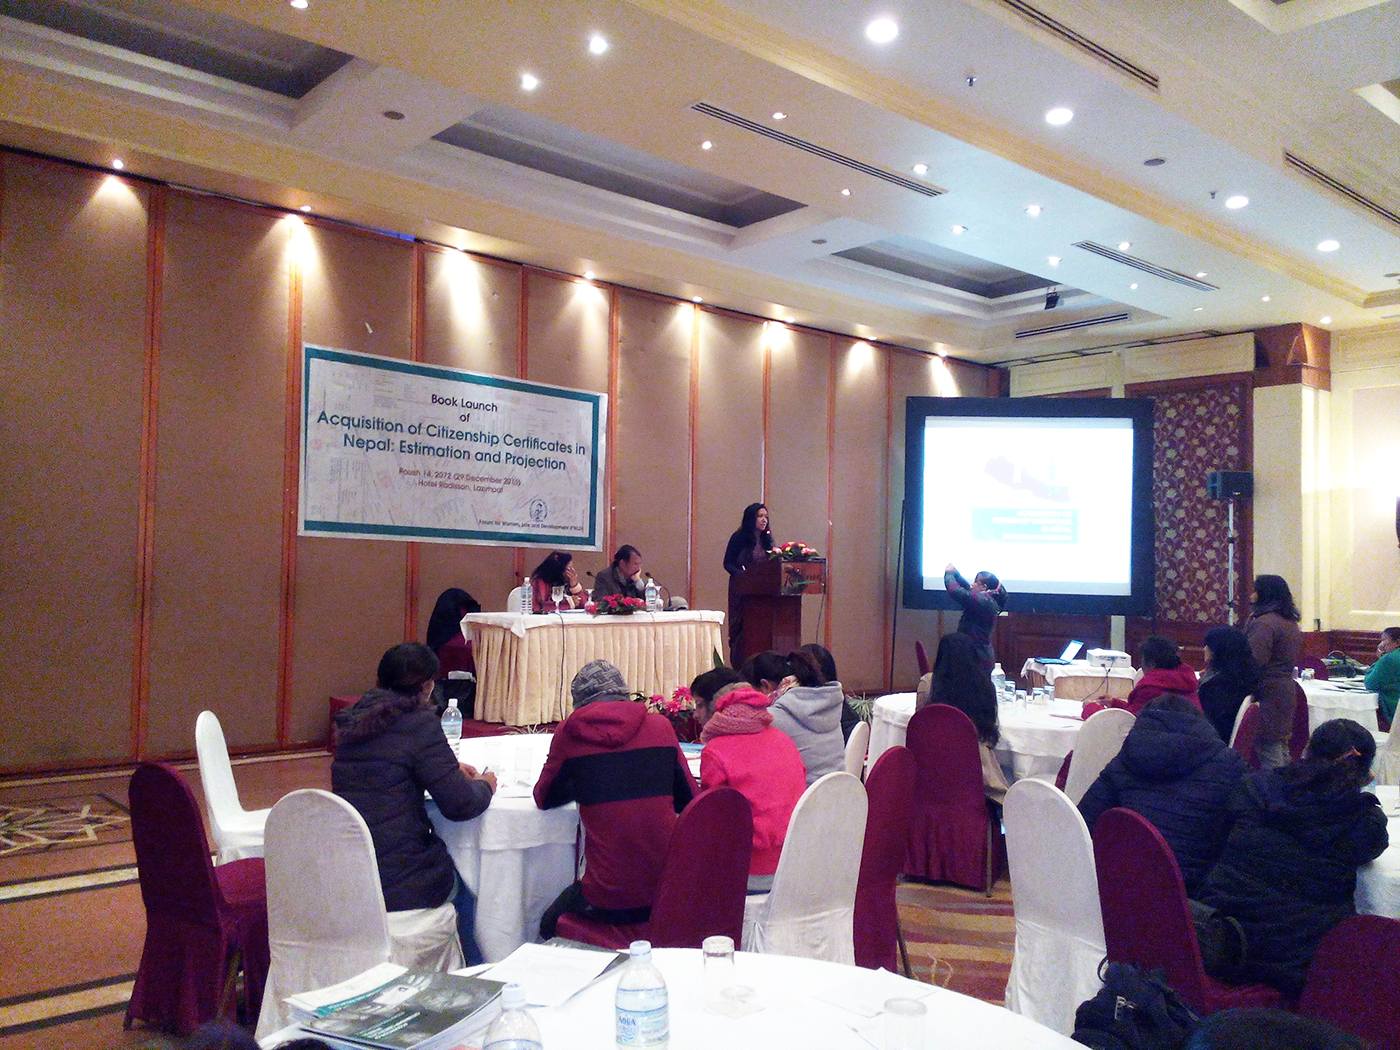 Book Launch of 'Acqusition of Citizenship Certificates in Nepal: Estimation and Projection' by Sapana Pradhan Malla and Meera Dhungana in December 2015